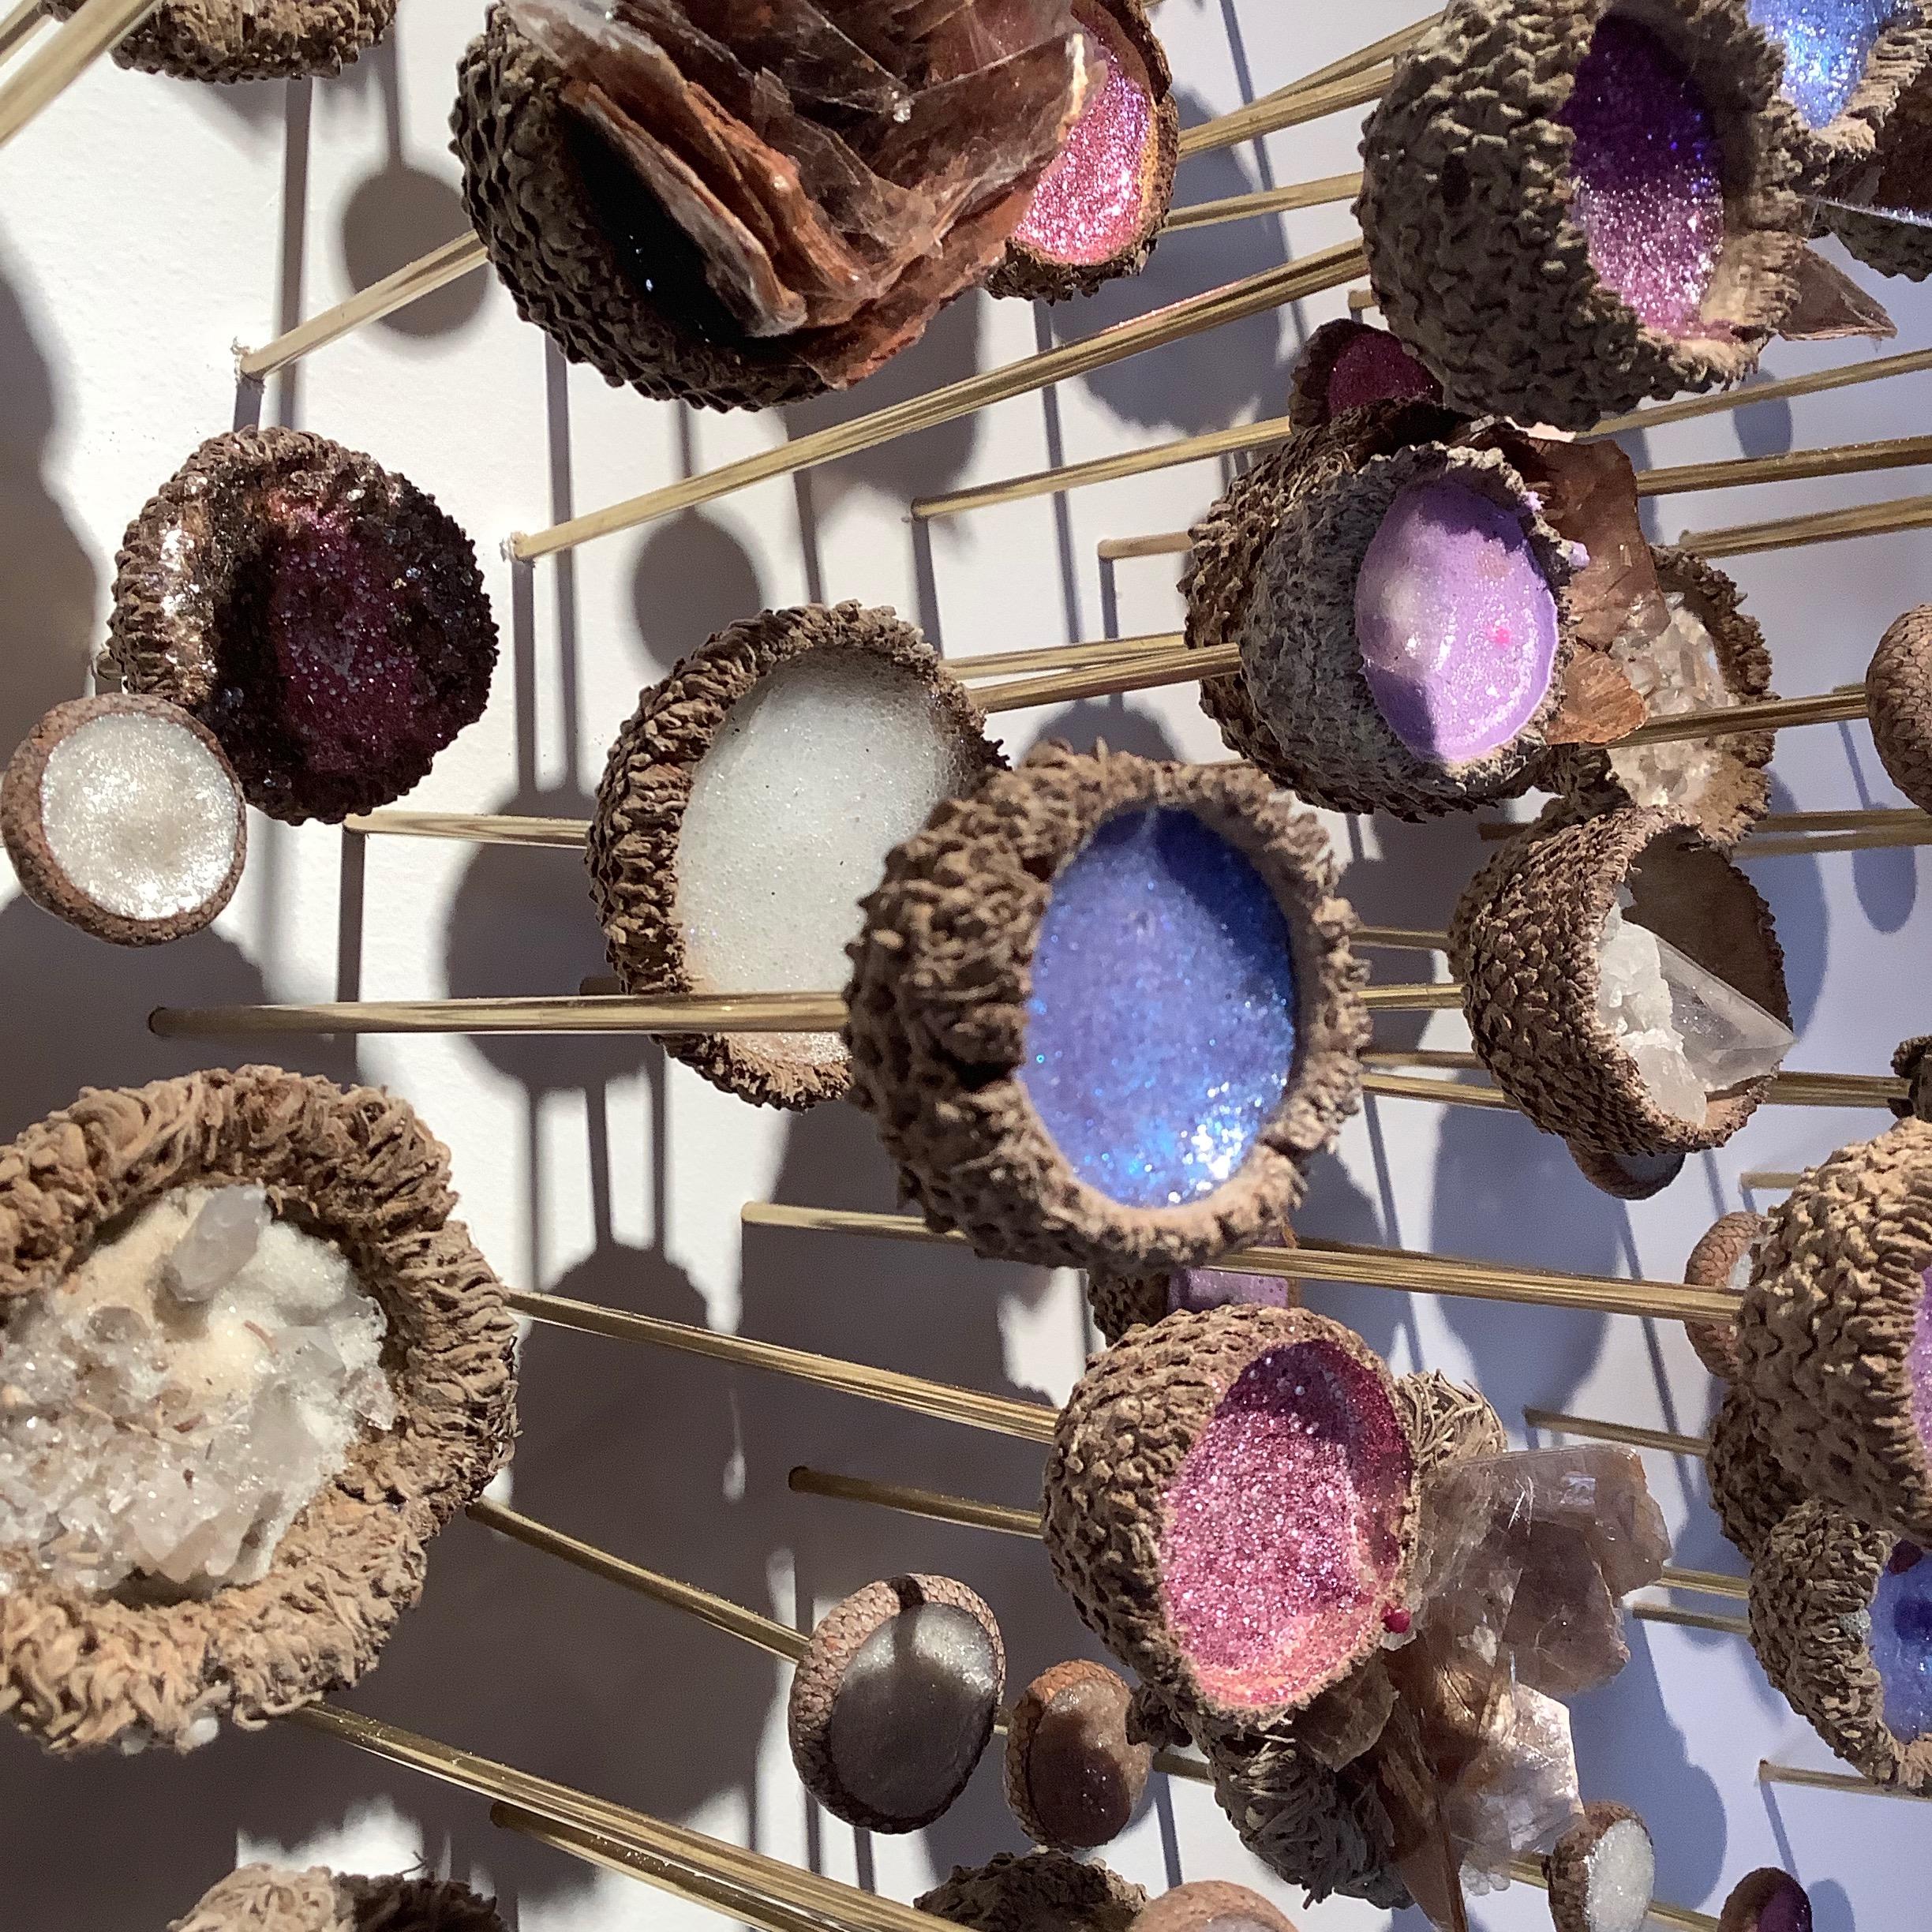 This wall sculpture consists of a meandering installation of acorn caps on brass pins filled with industrial pigments, glitter, natural minerals such as quartz and mica, and synthetic materials in hues of lavender, bright purple and pink, with